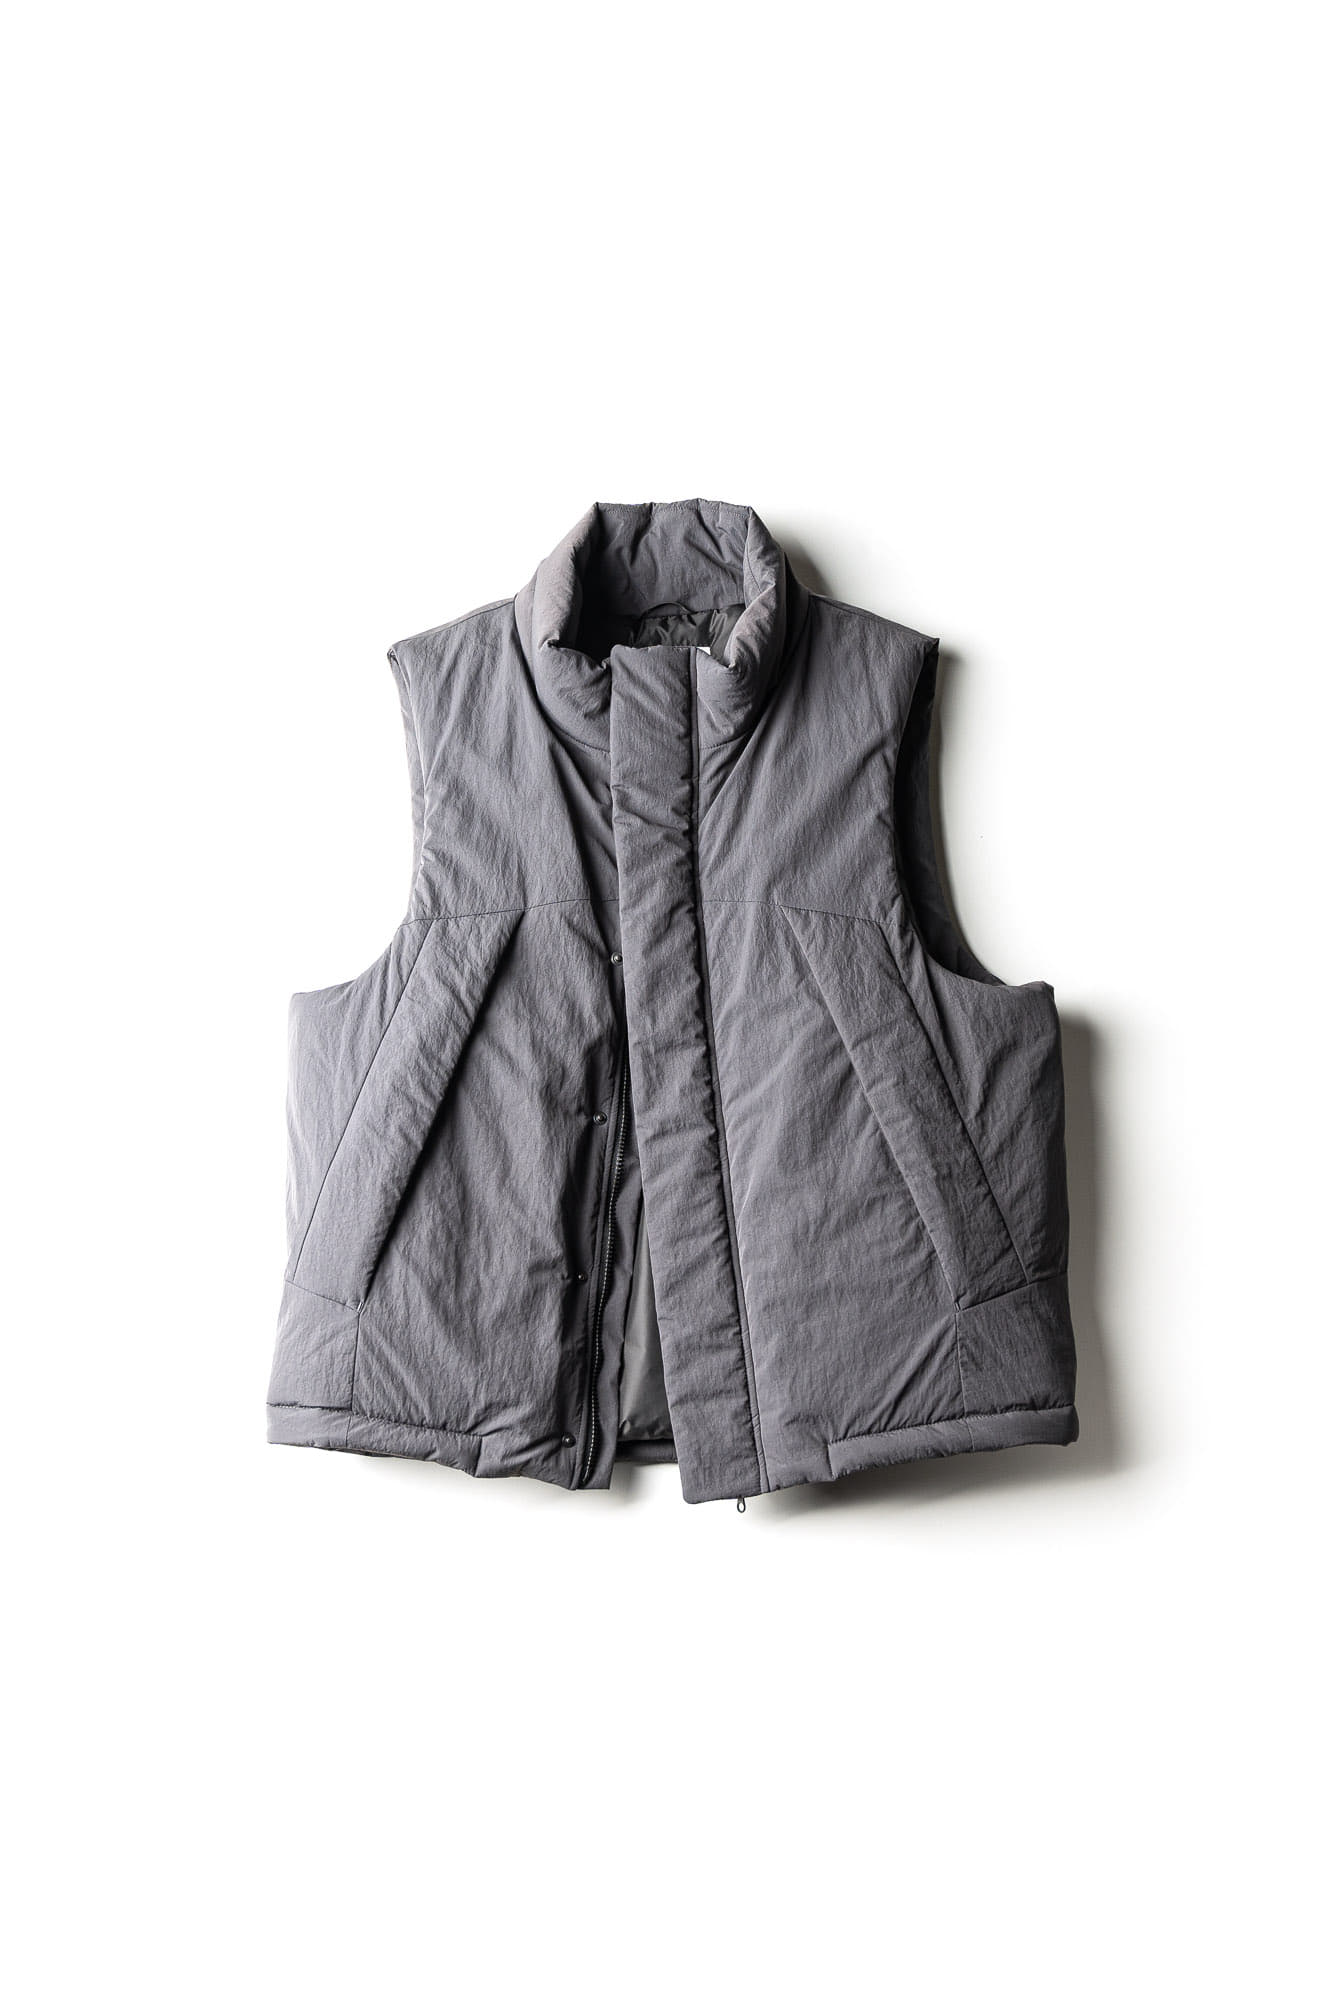 INSULATION TRAVELLER VEST - DUSTY CHARCOAL